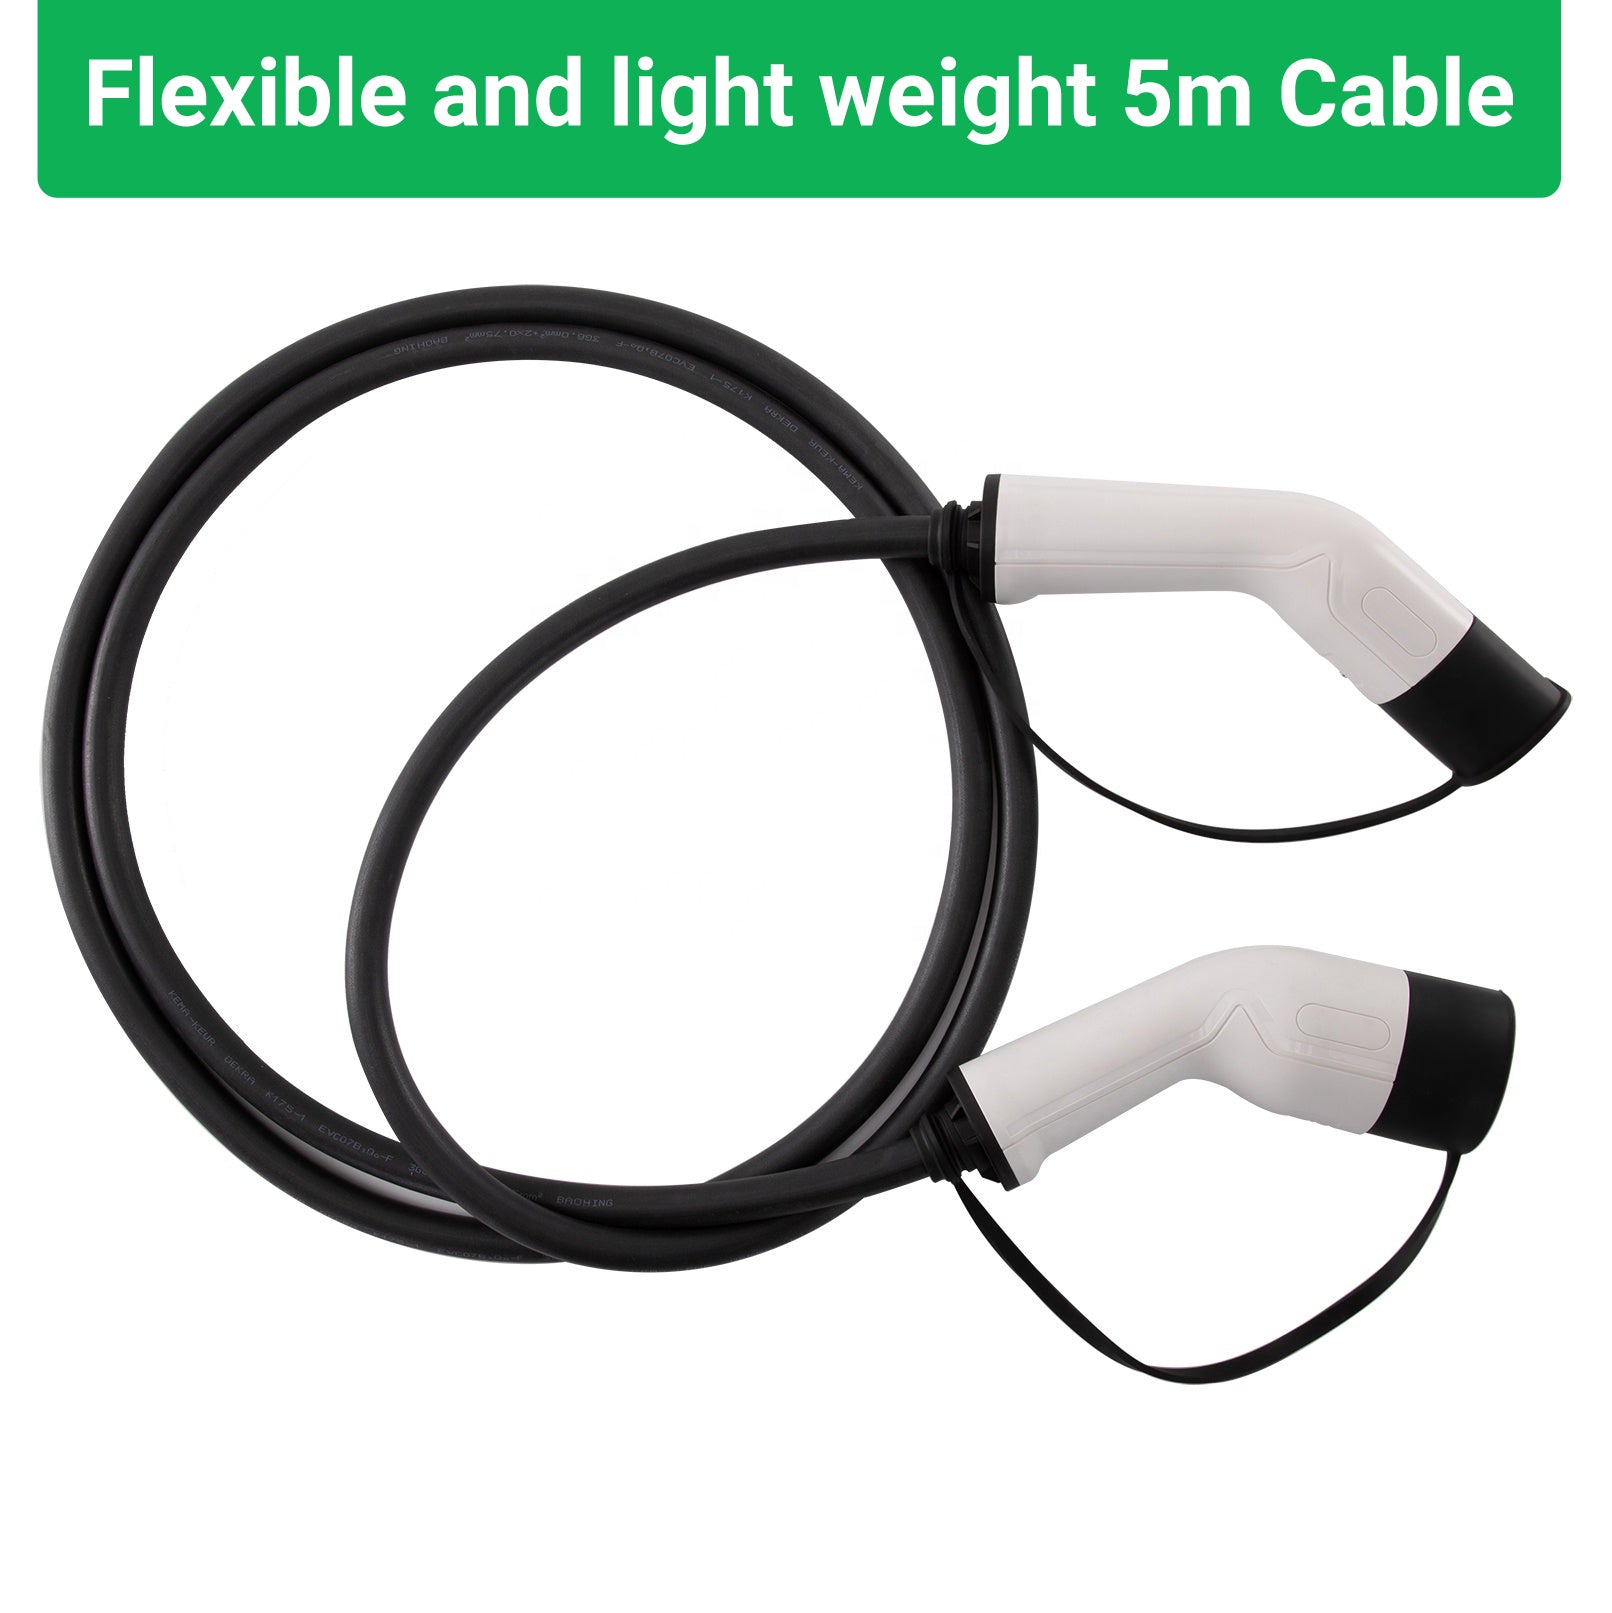 EV Charging cable Type 2 (16Ax3) 11kW - 5m lenght - Everything necessary  for EV charging - Hardware and Software!